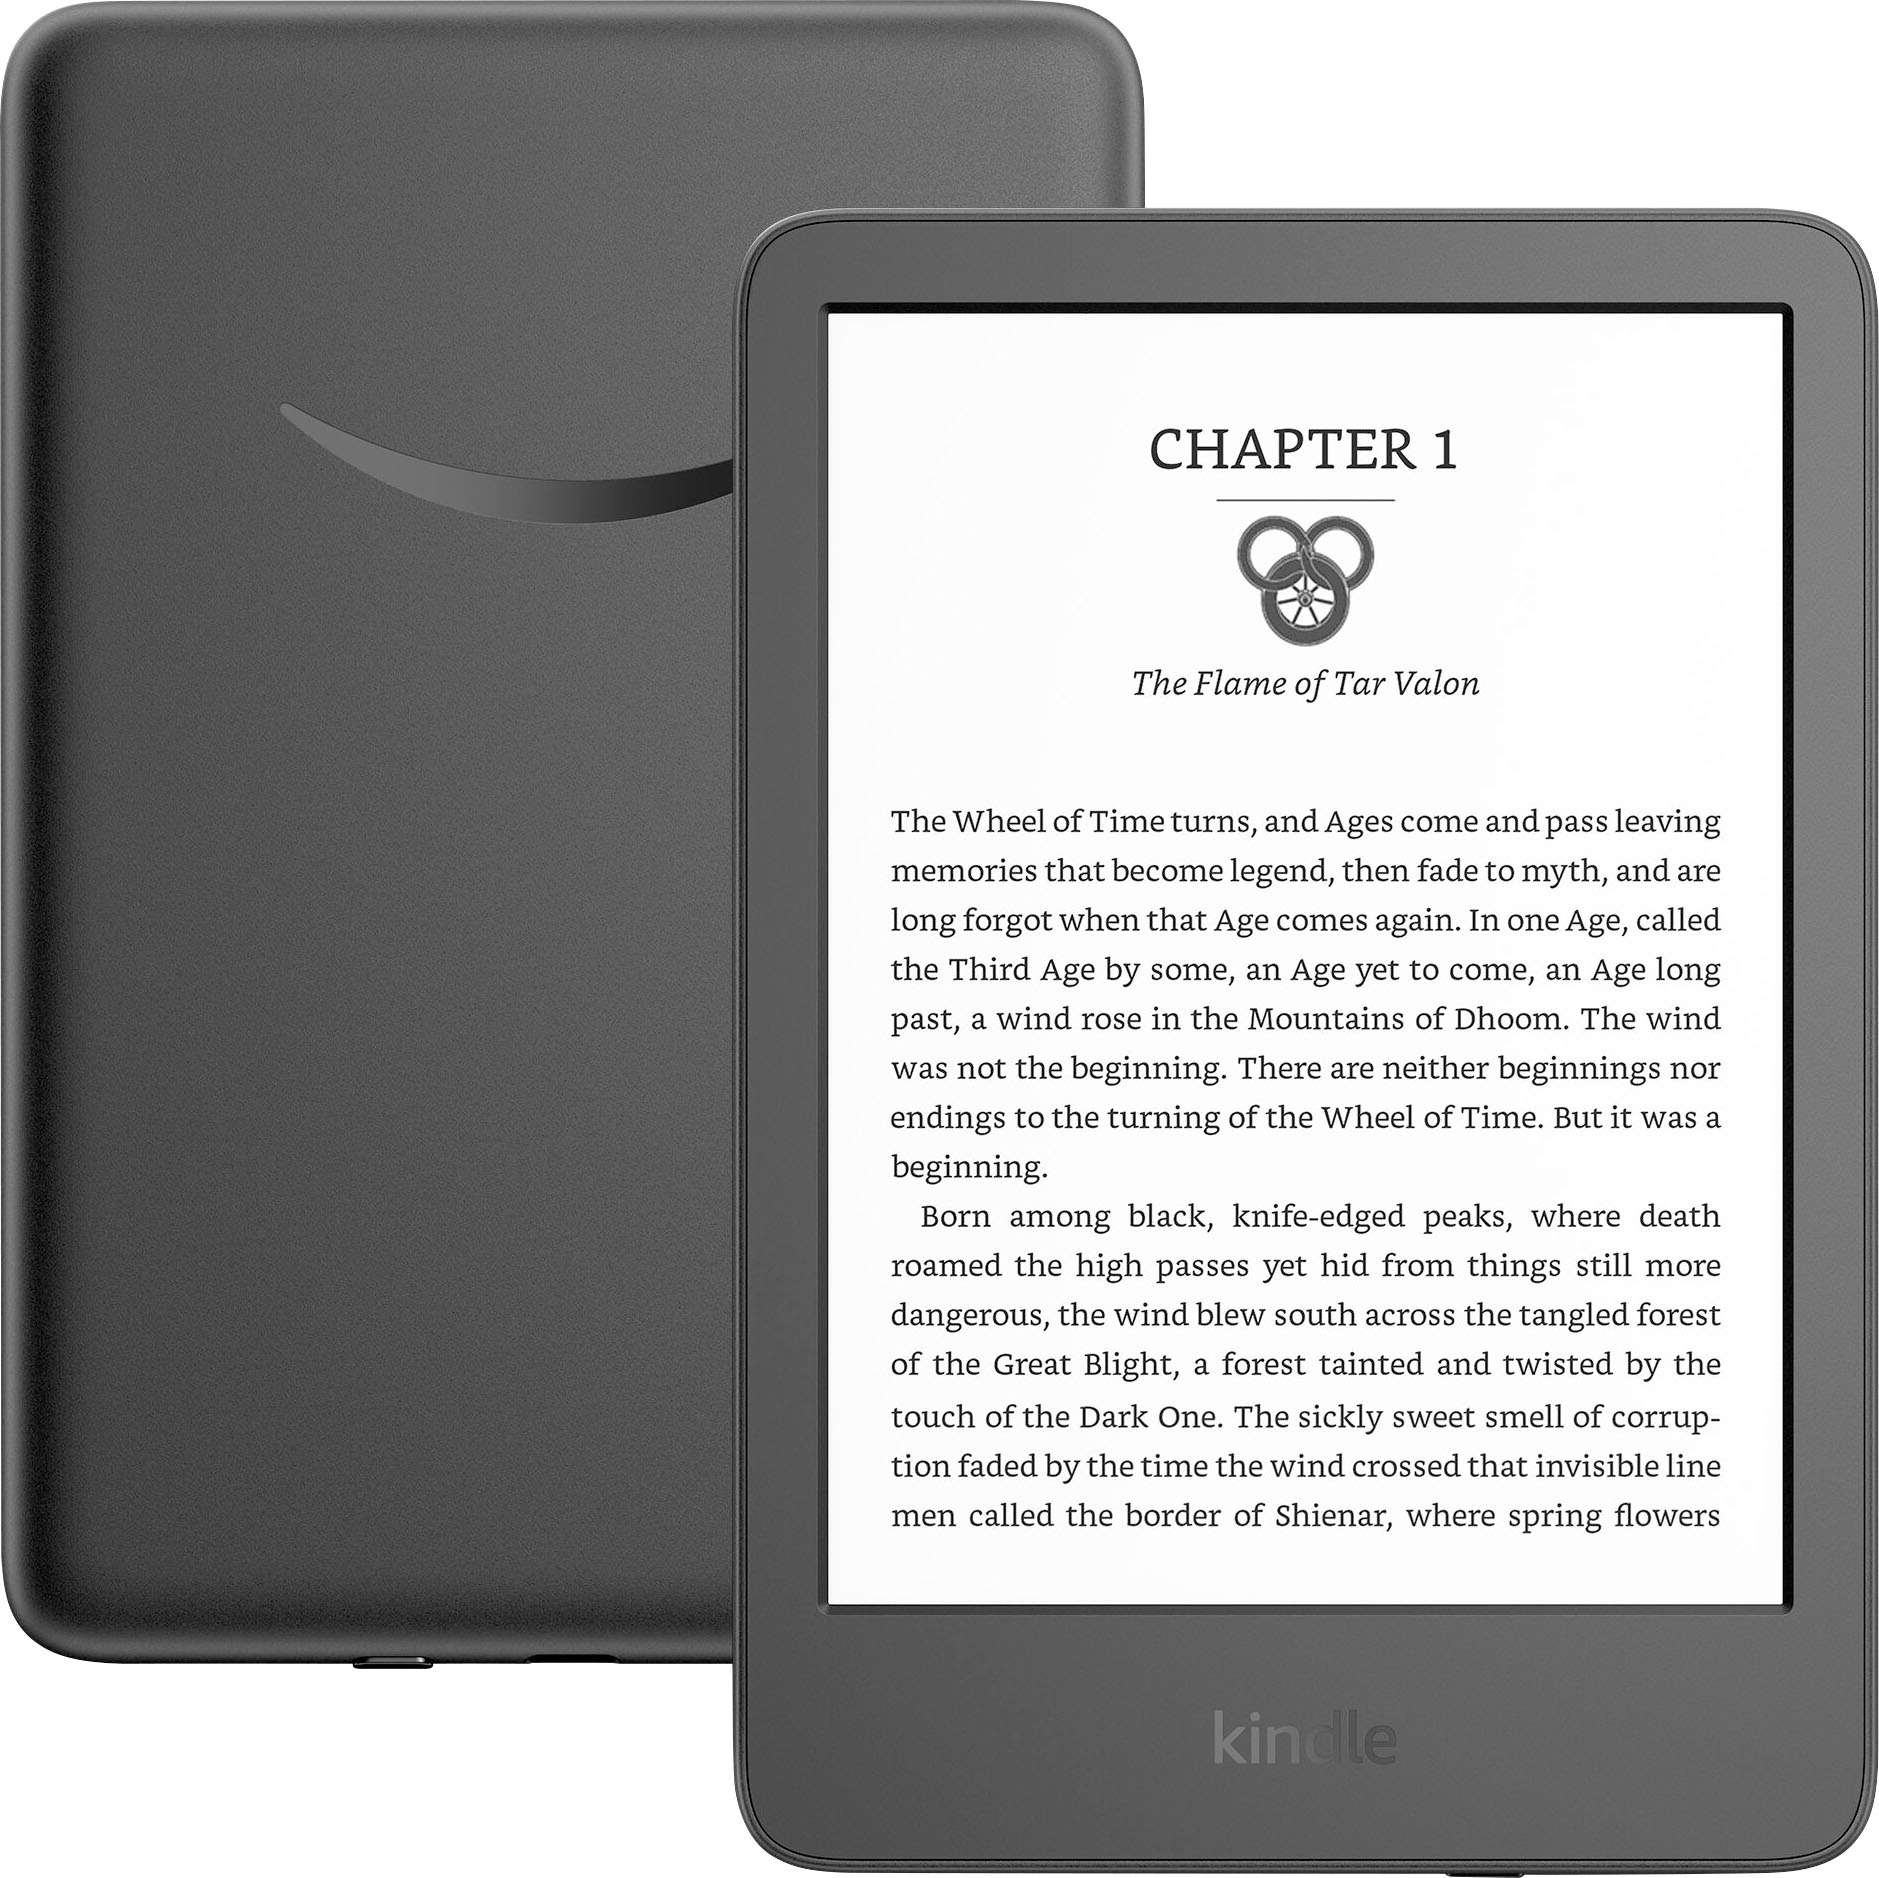 releases upgraded Kindle and Kindle Kids devices for first